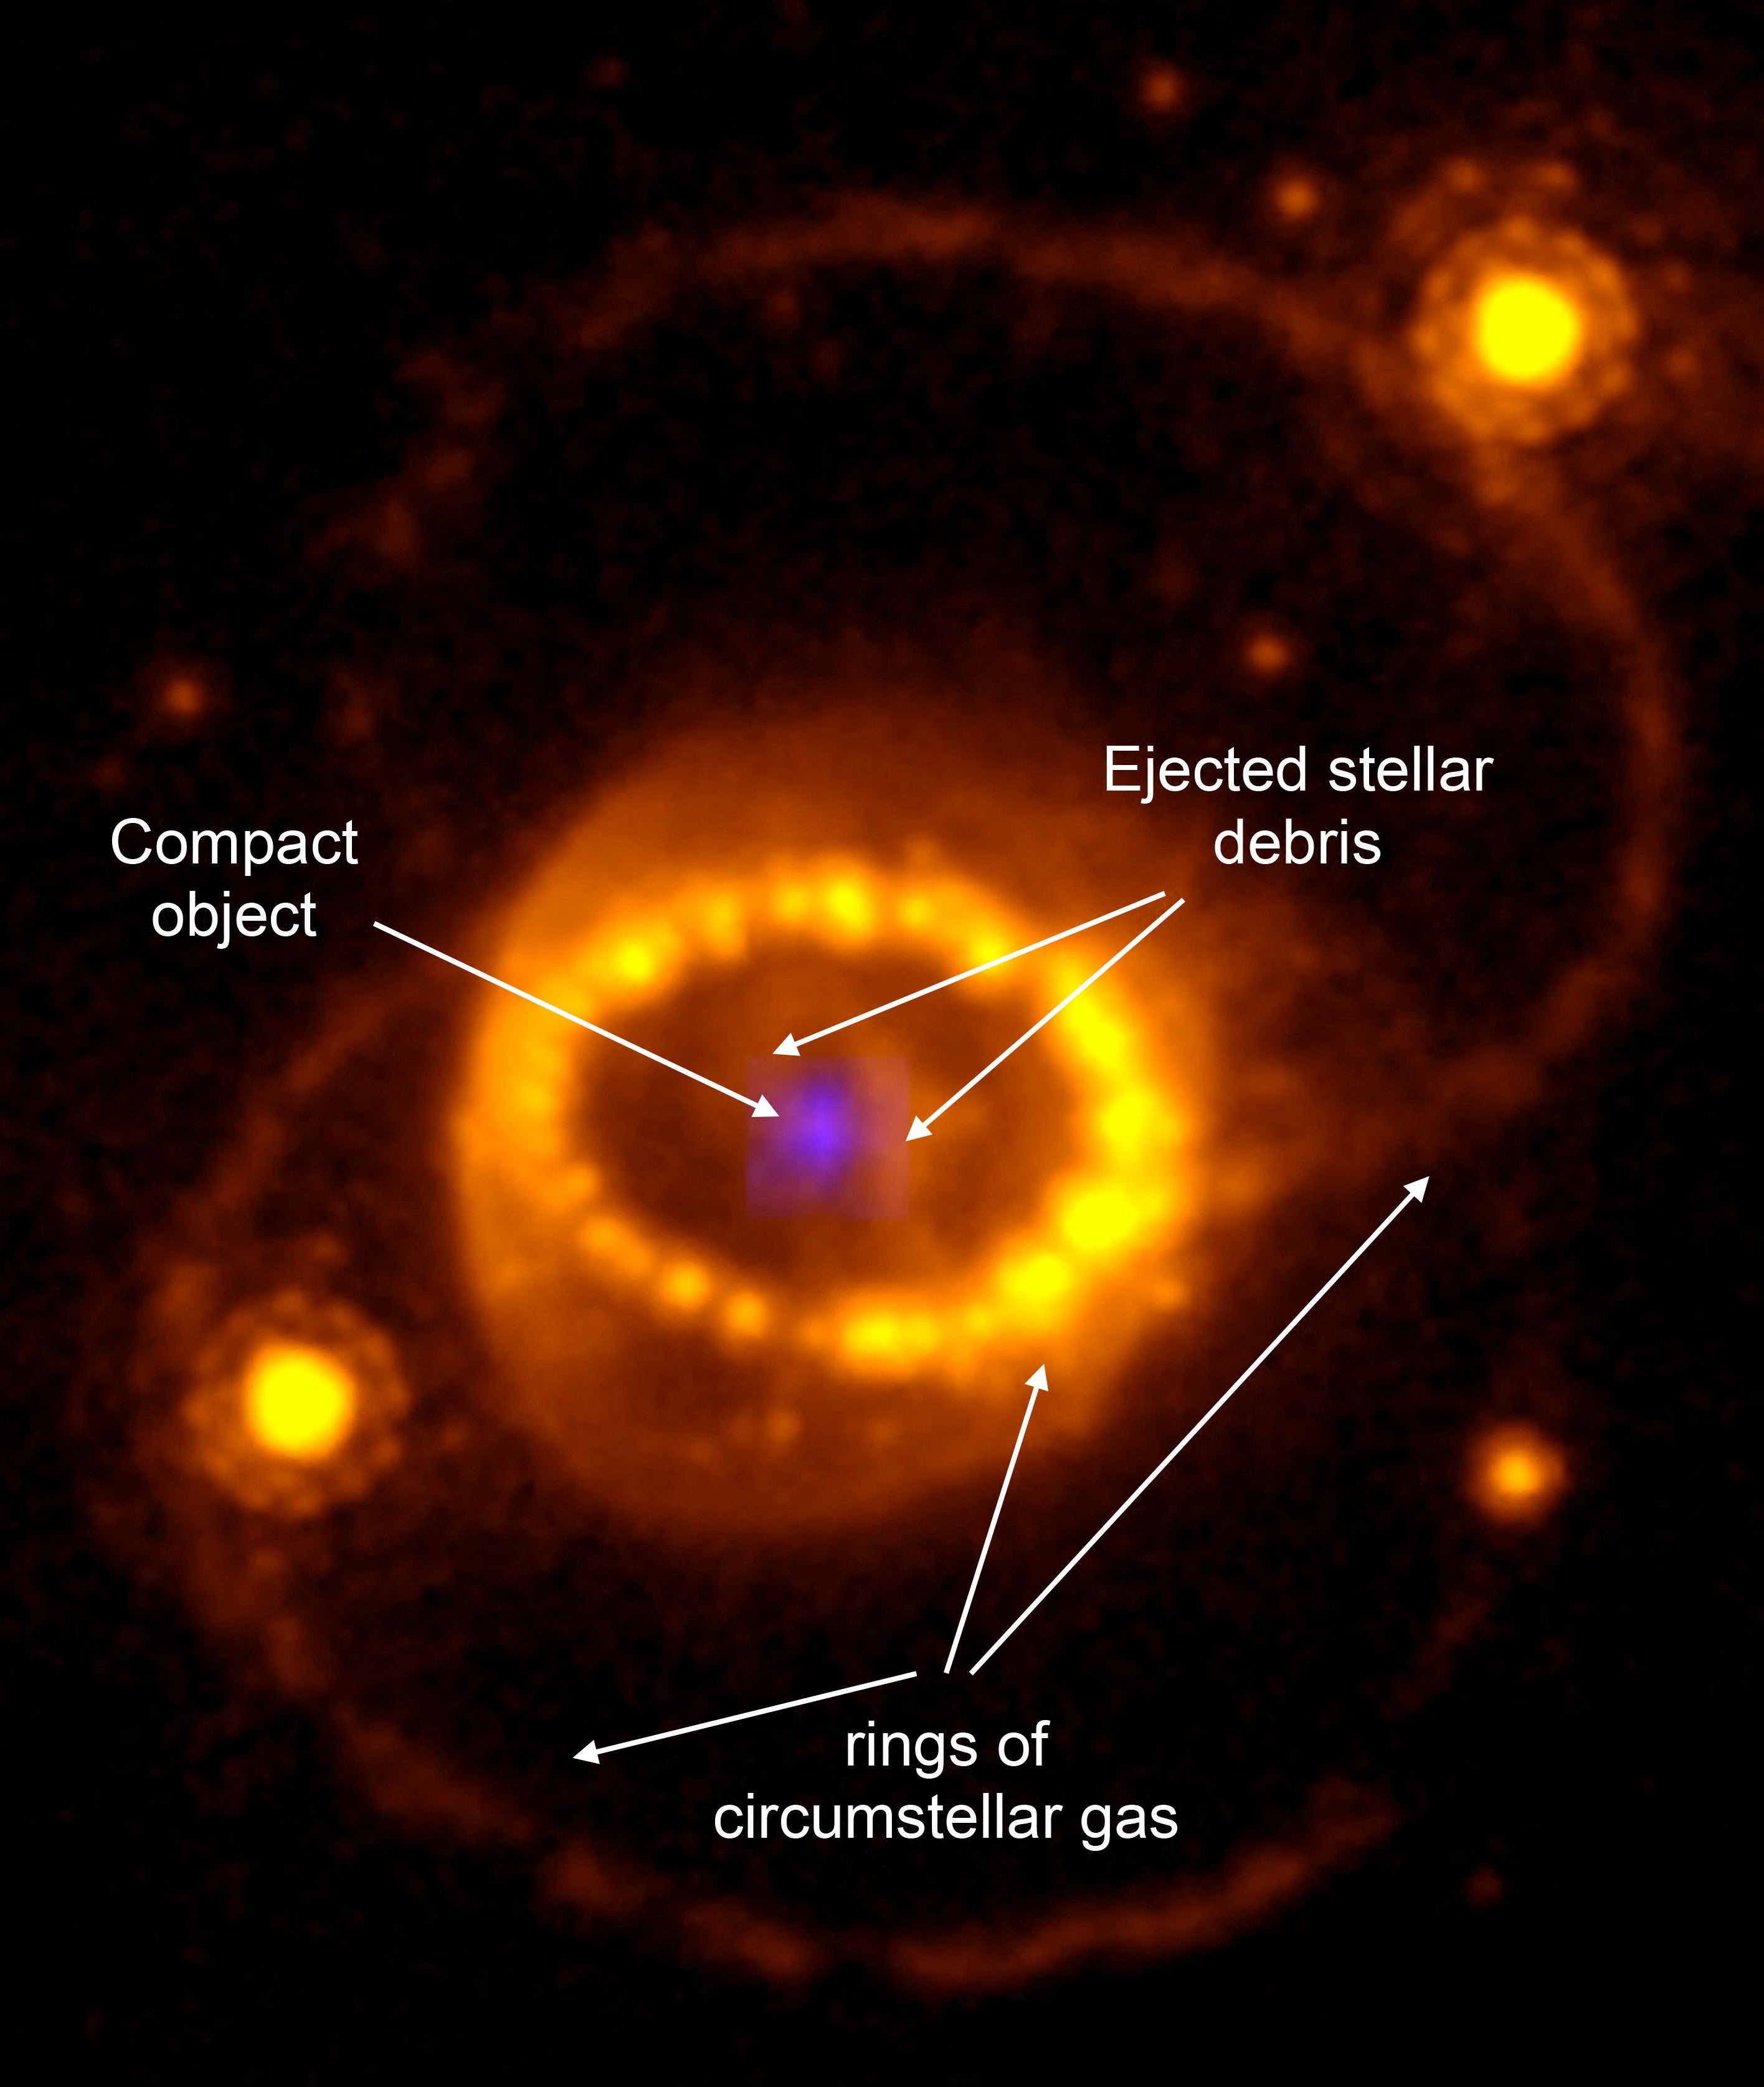 Image shows evidence for a neutron star following a stellar explosion called Supernova 1987